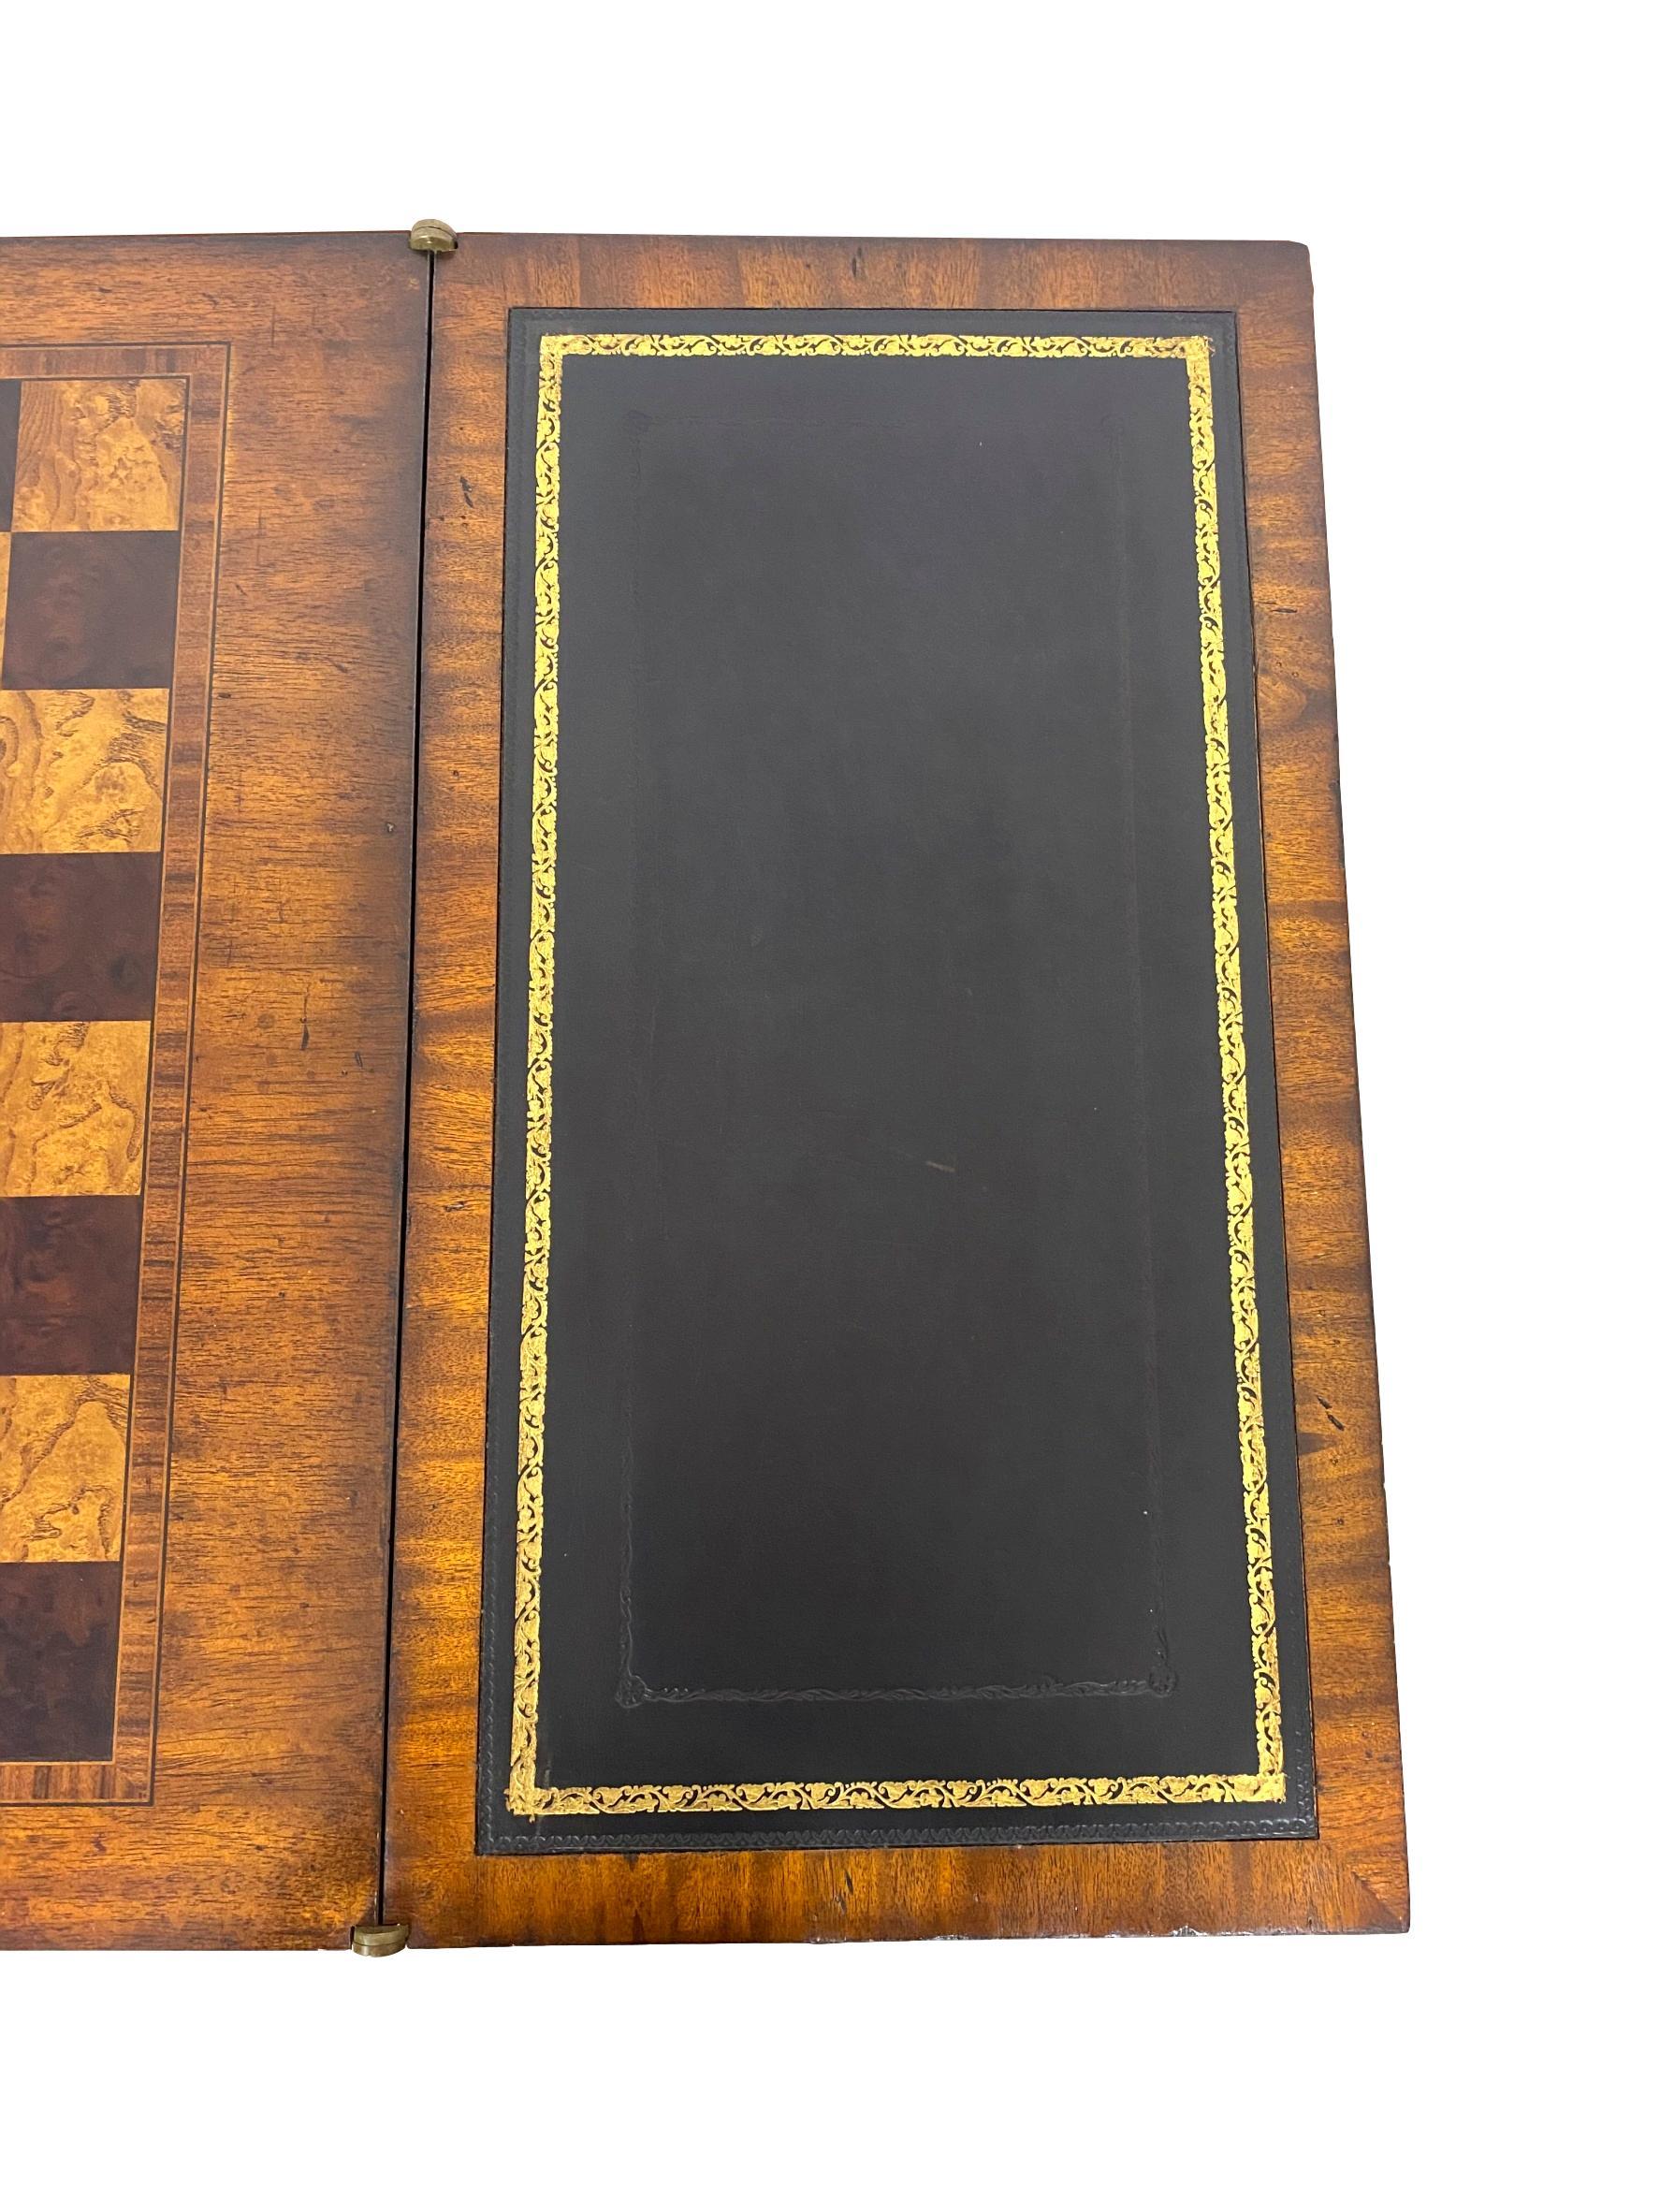 Maitland-Smith Inlaid with Exotic Woods Marquetry Game Table Chess 3